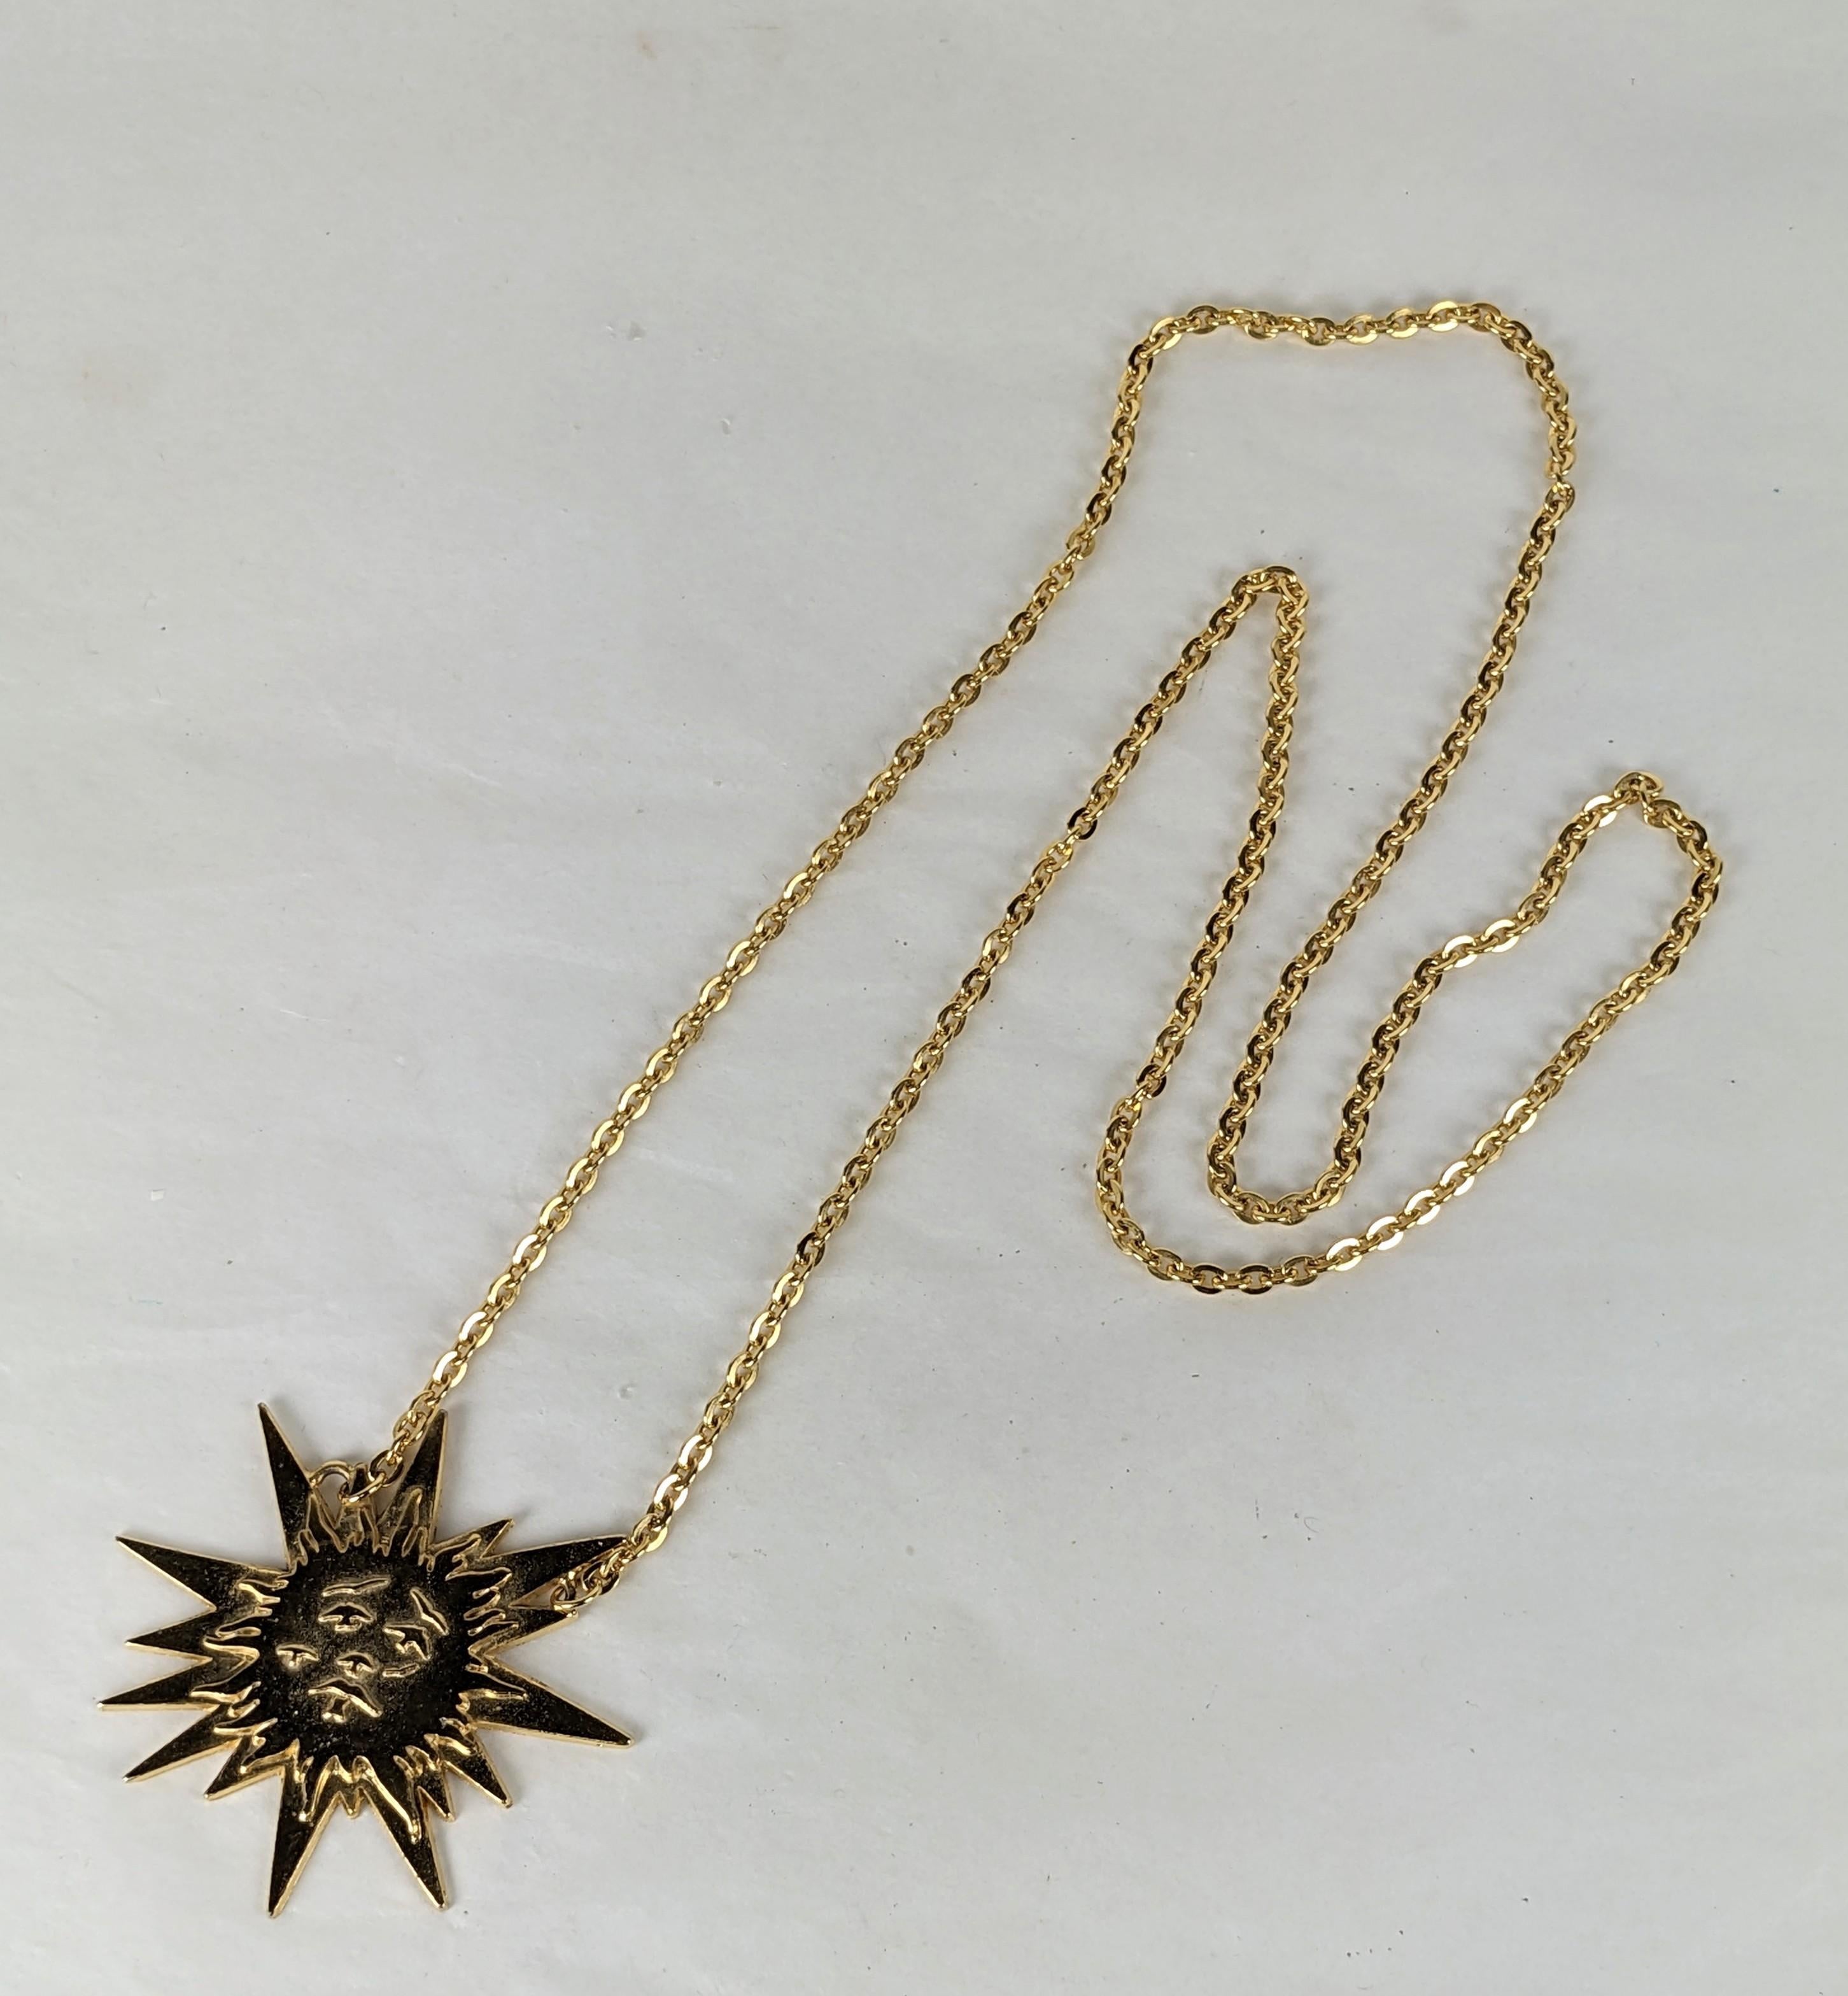 Salvador Dail Le Roi Soleil Rare Pendant Necklace made for the perfume launch.
Le Roi Soleil is a perfume by Elsa Schiaparelli produced in 1947, to celebrate the end of the World War by recalling the glory days of the Louis XIV. Le RoiSoleil was re